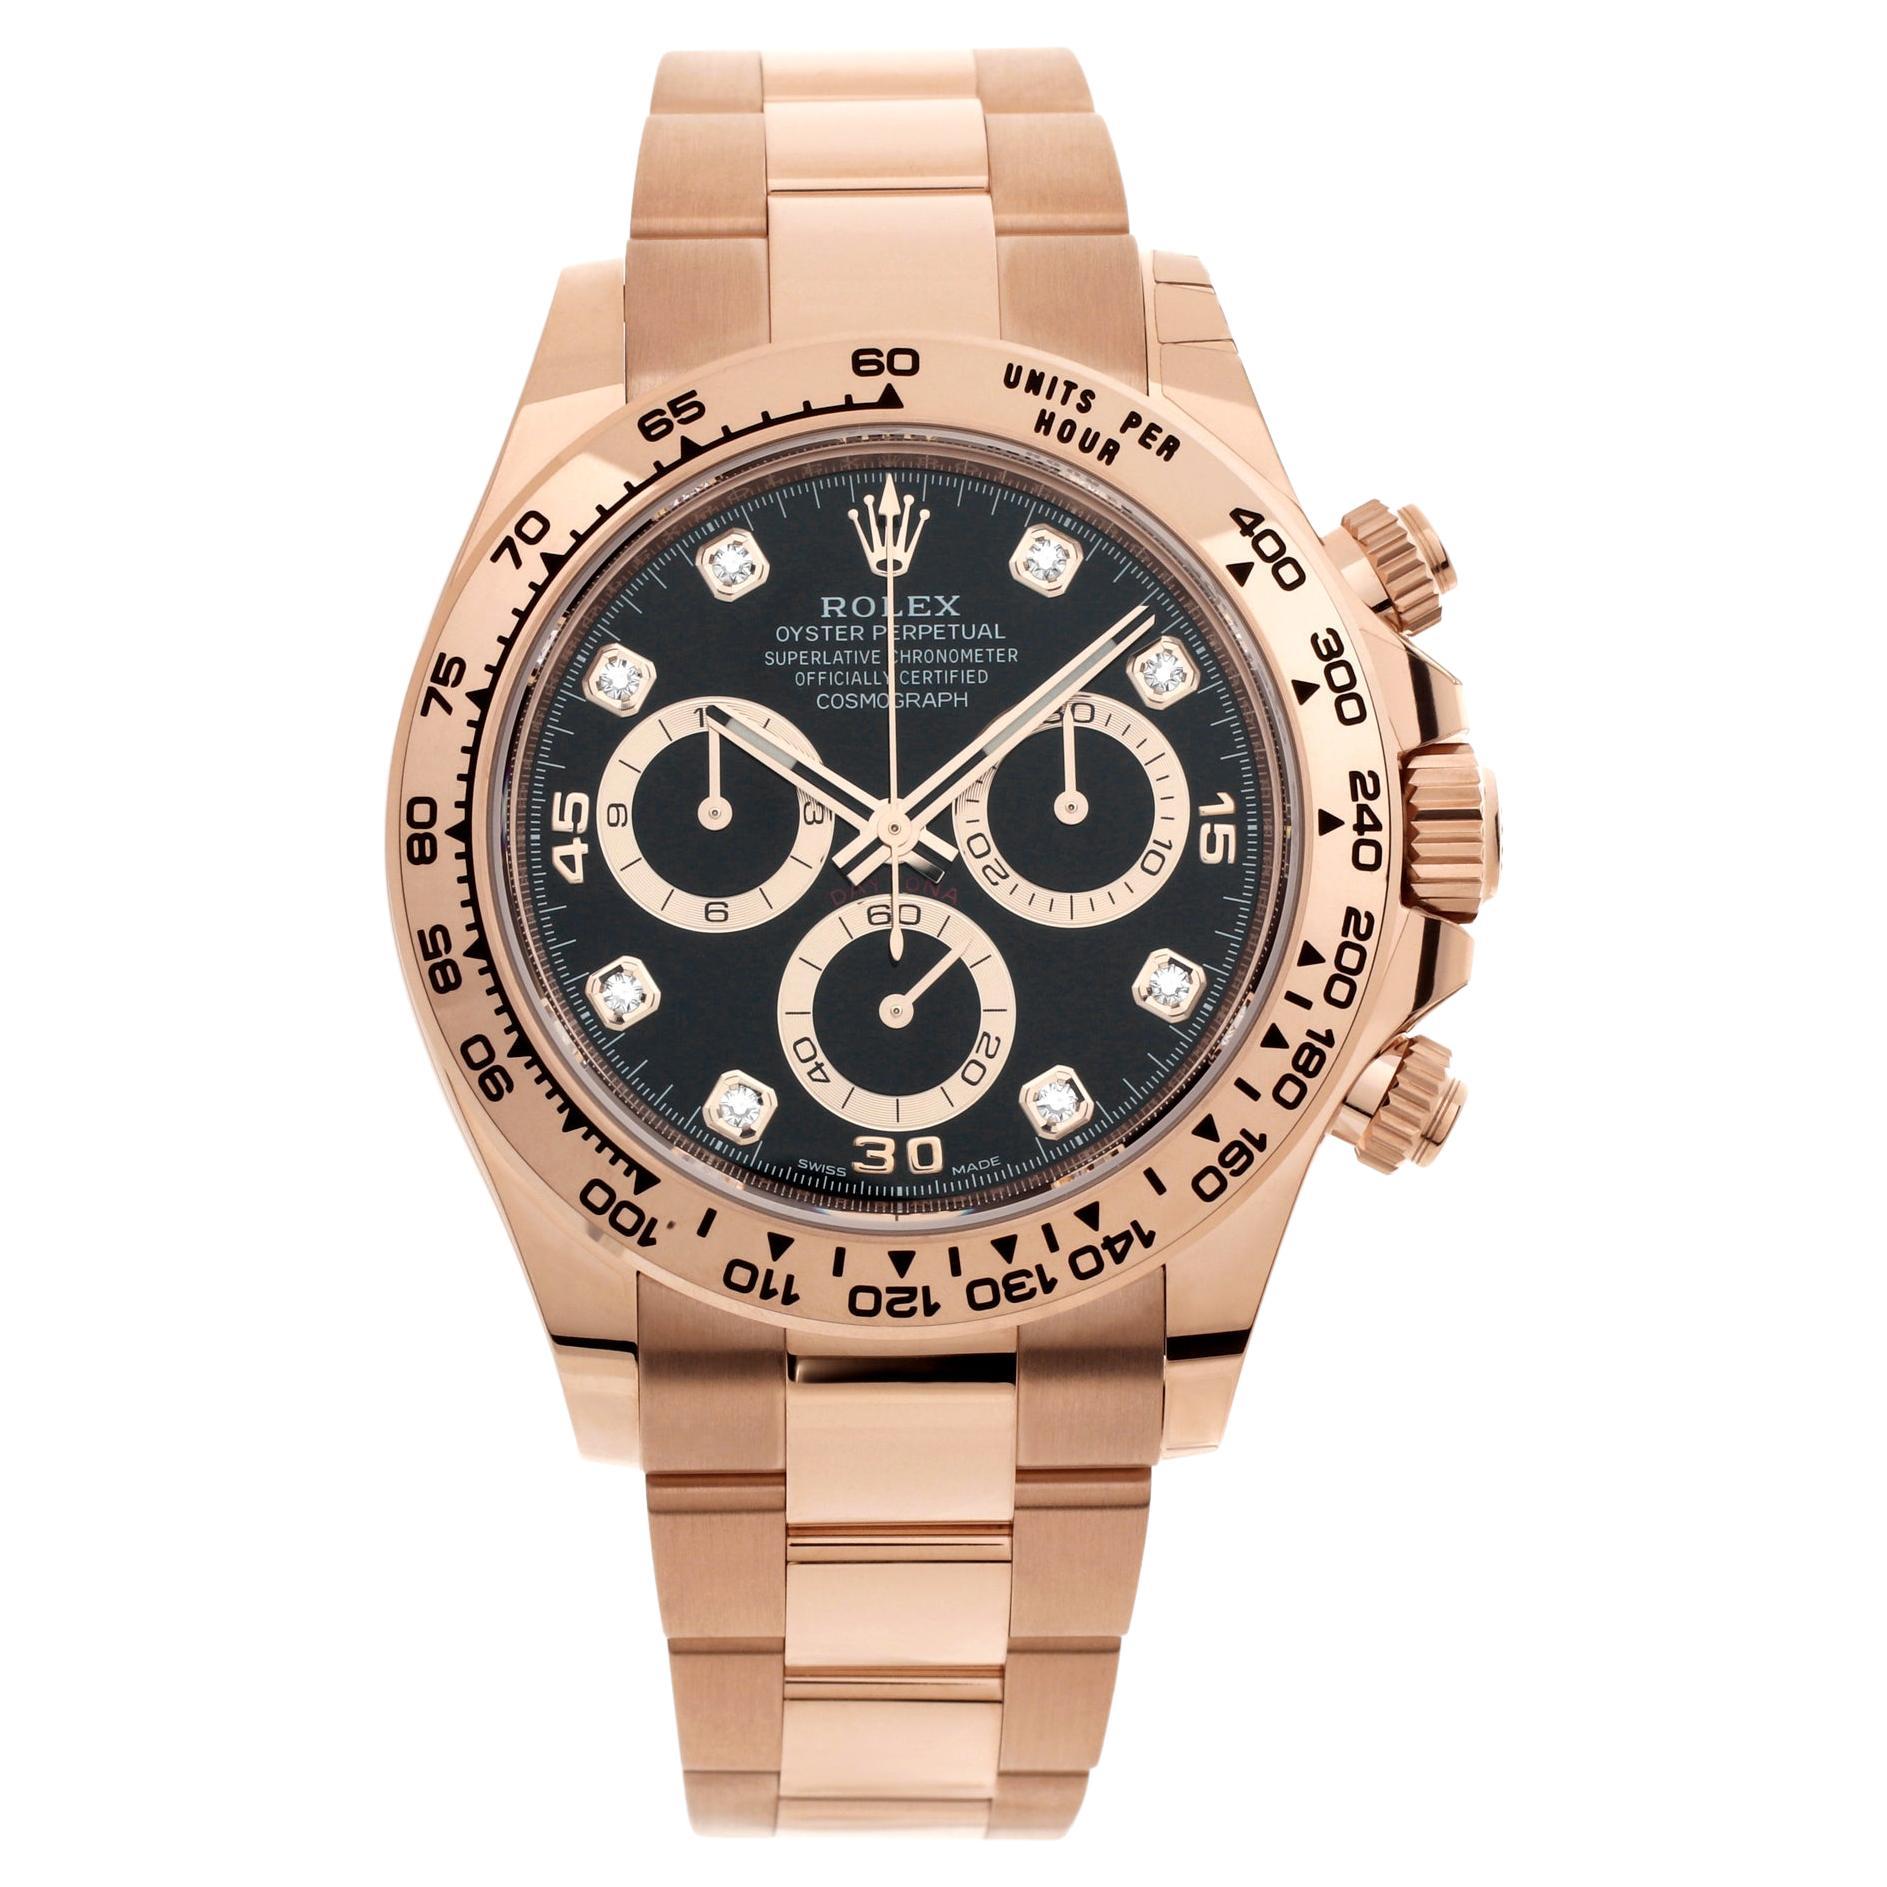 How much is a Daytona Rolex?